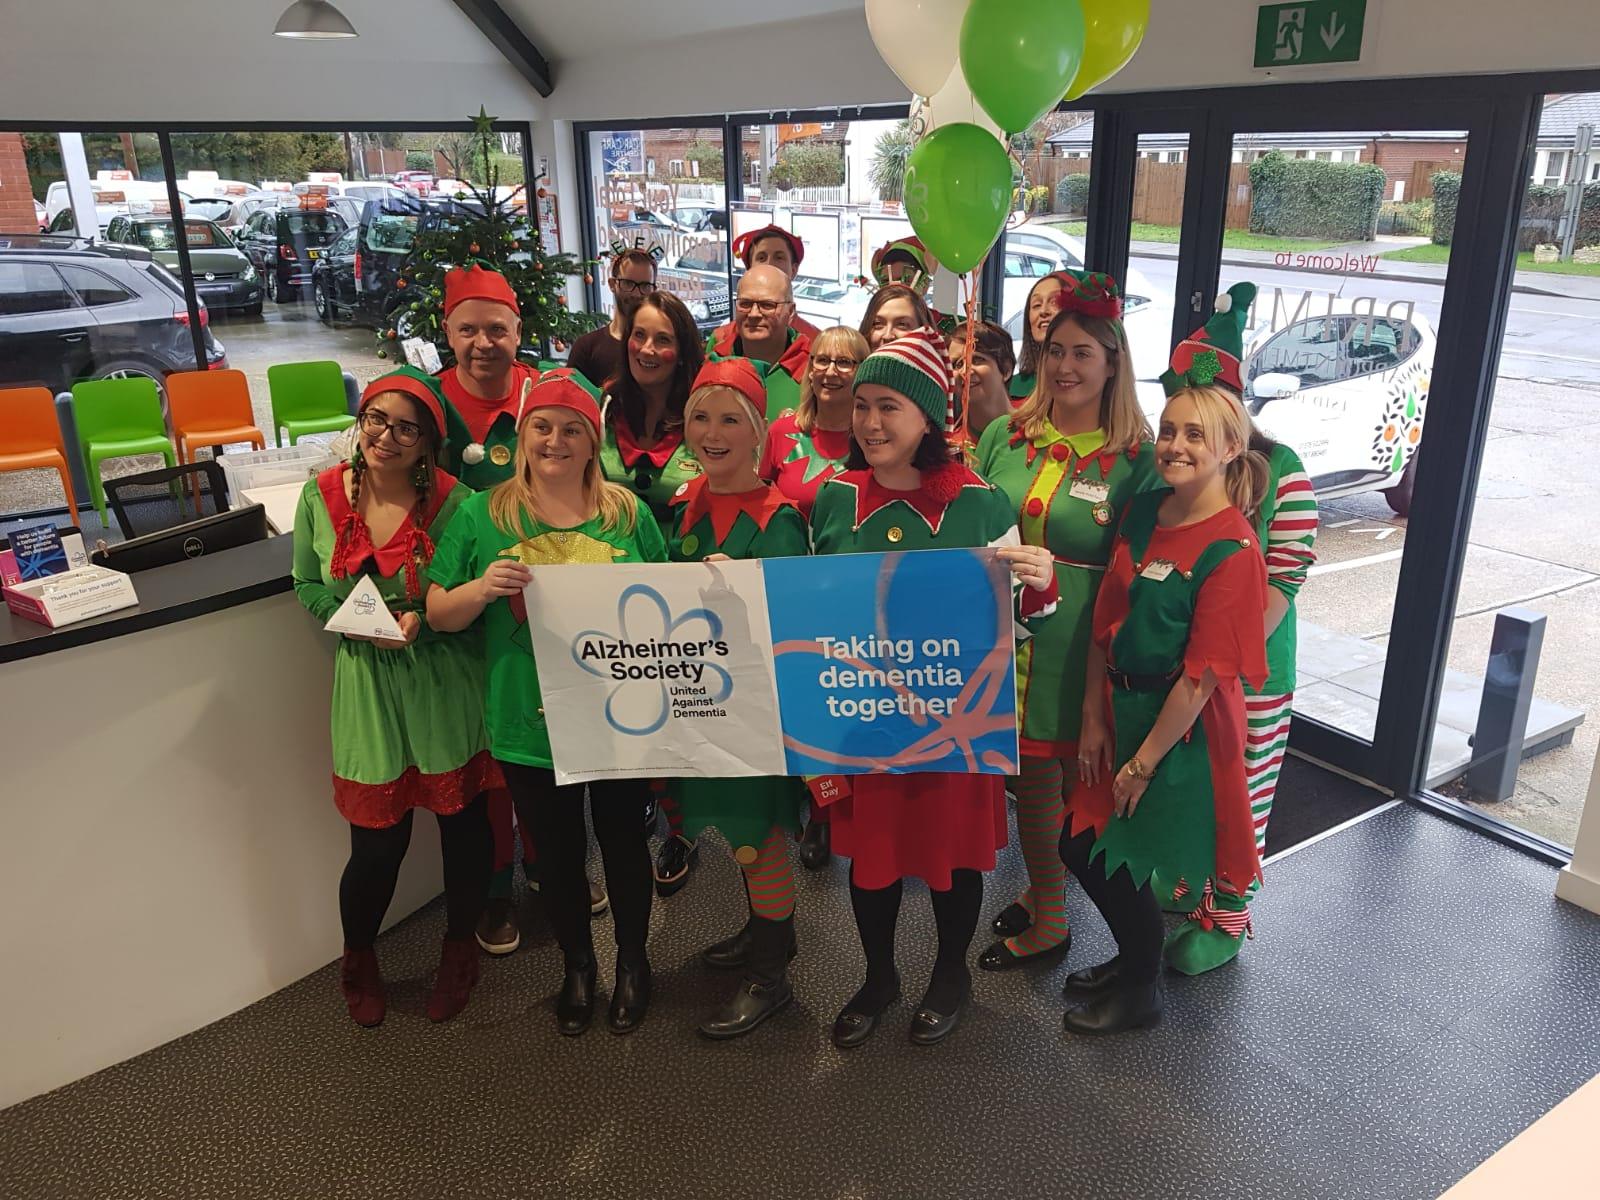 Prime Appointments staff dressed as Elfs for Alzheimers at Prime Appointments HQ in Witham